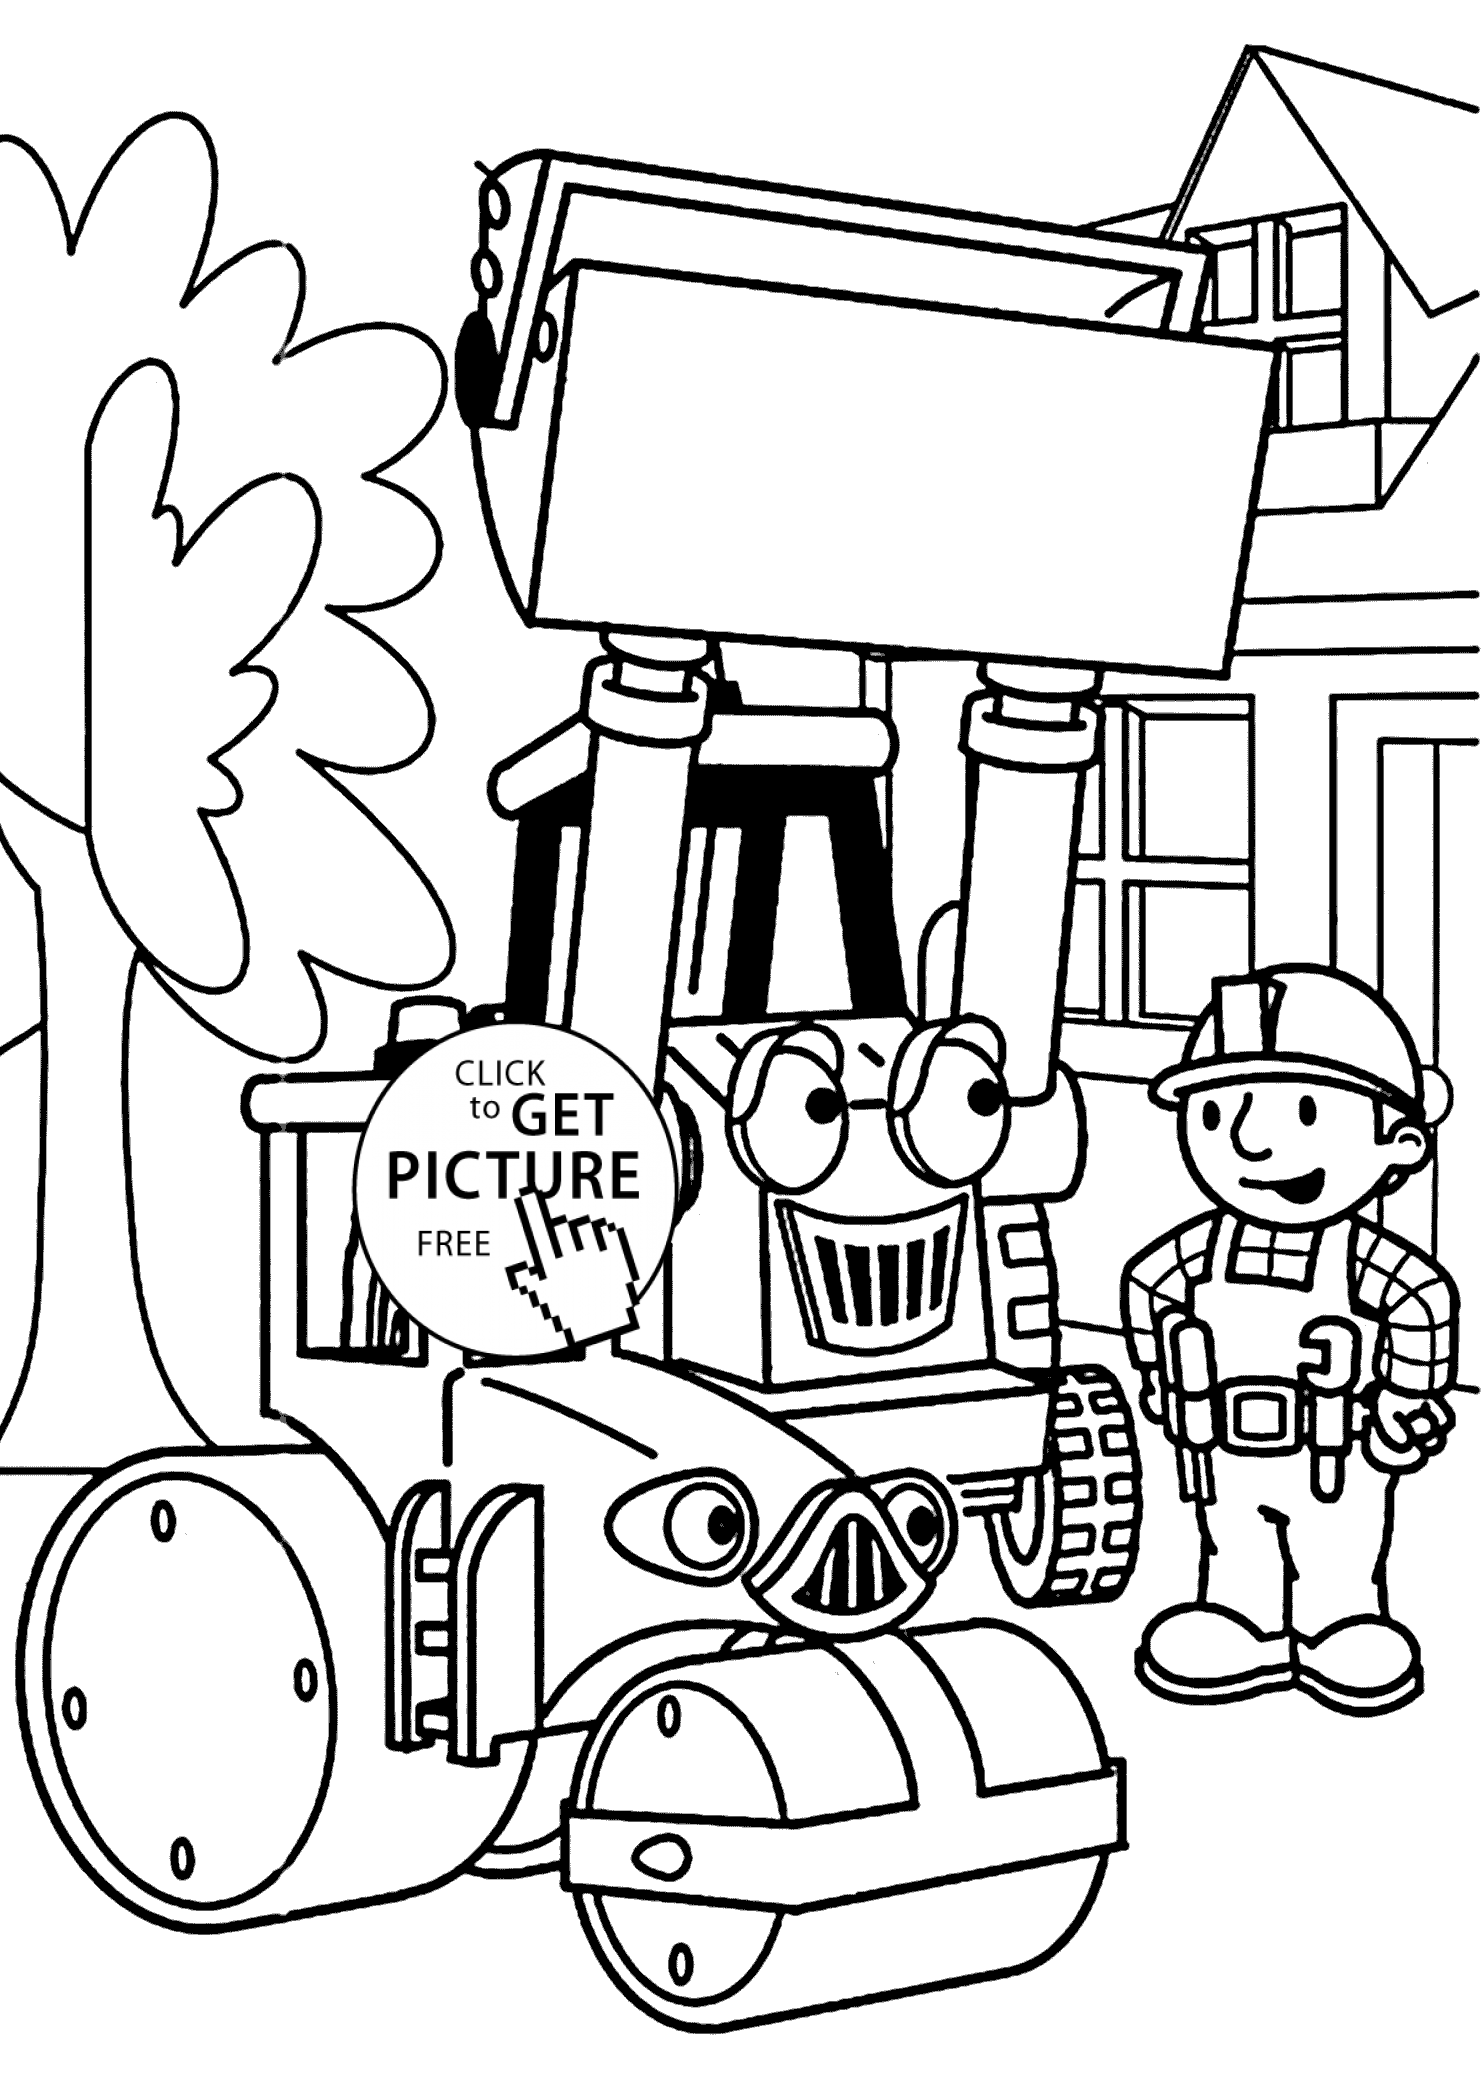 Bob And Tractors Coloring Page For Kids, Printable Free - Coloring Home